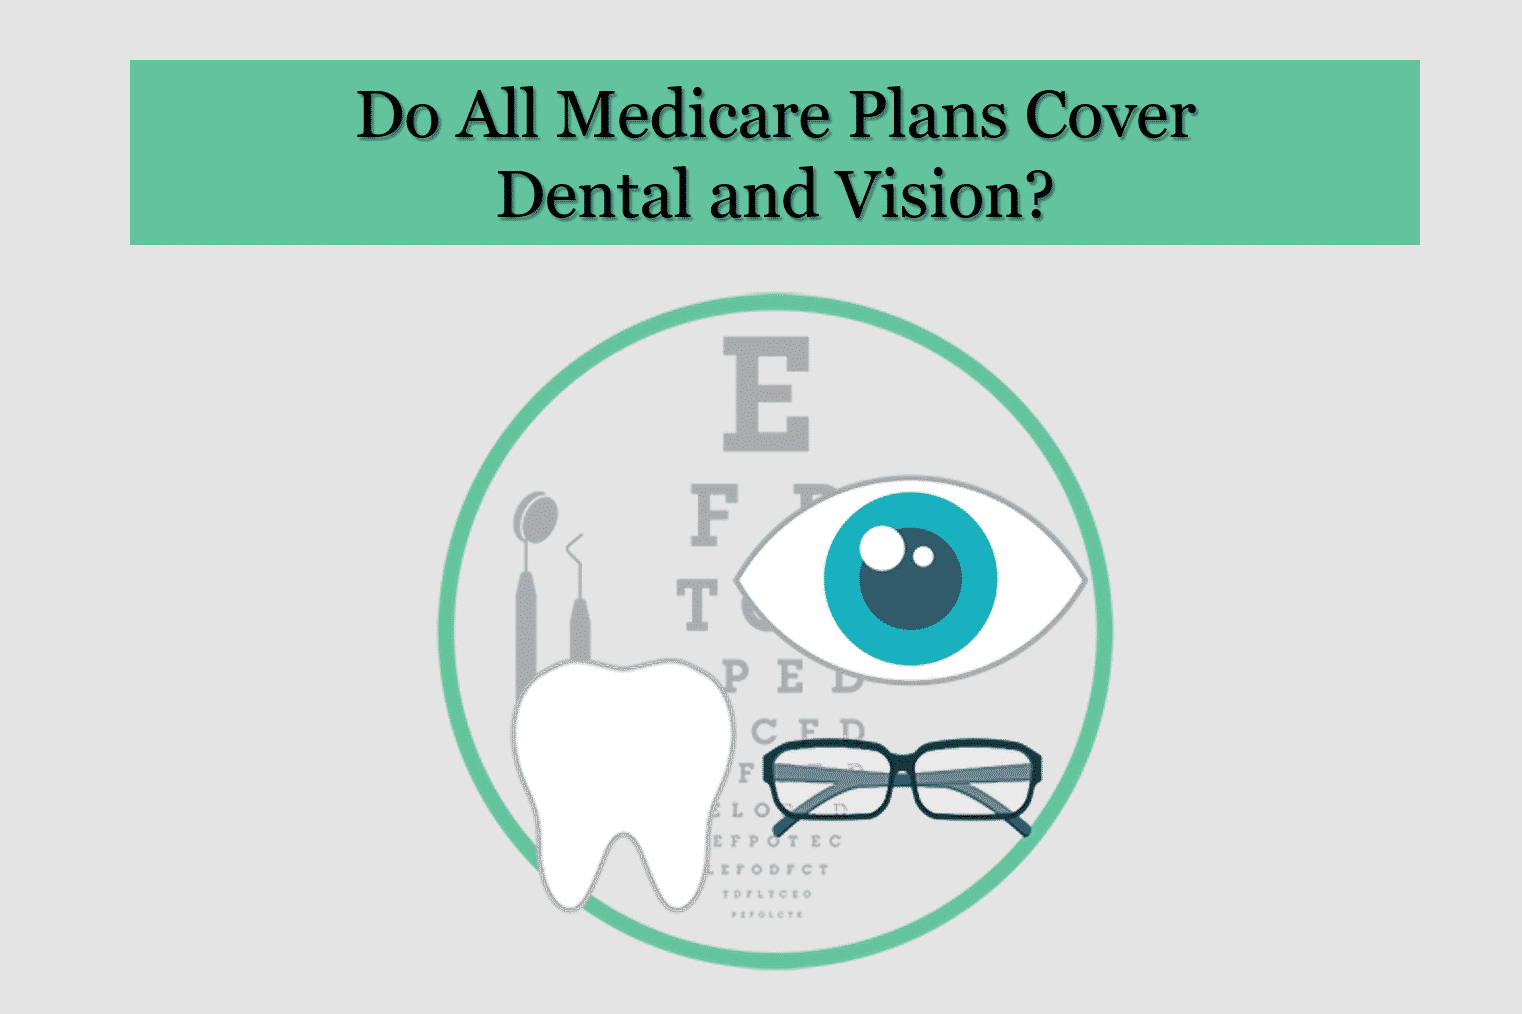 Do All Medicare Plans Cover Dental and Vision?